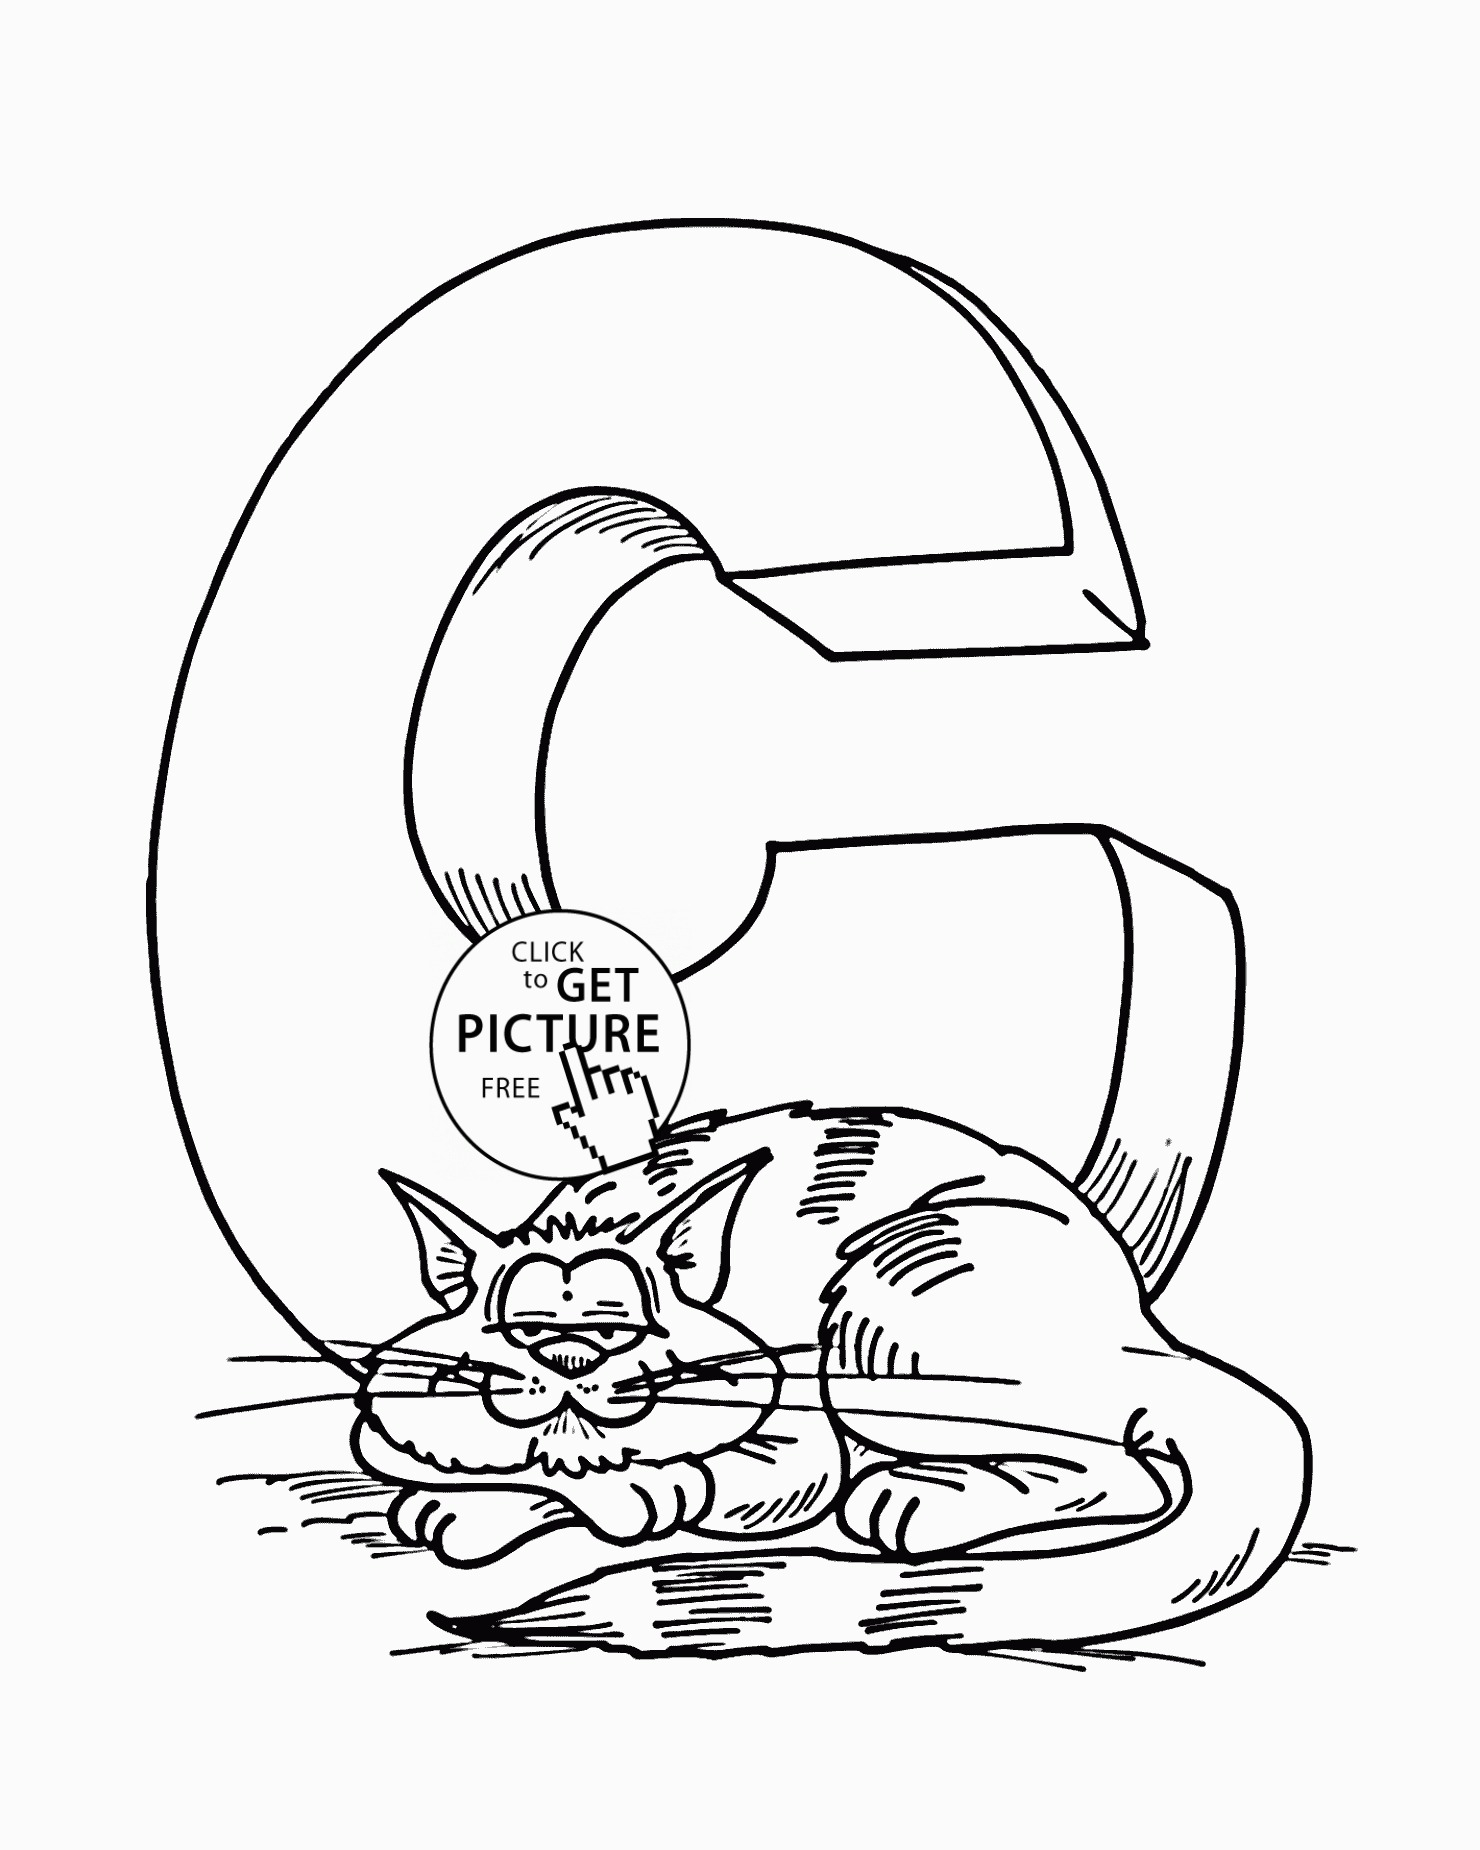 Letter C Coloring Pages For Preschoolers Letter C Coloring Pages For Toddlers Get Coloring Pages